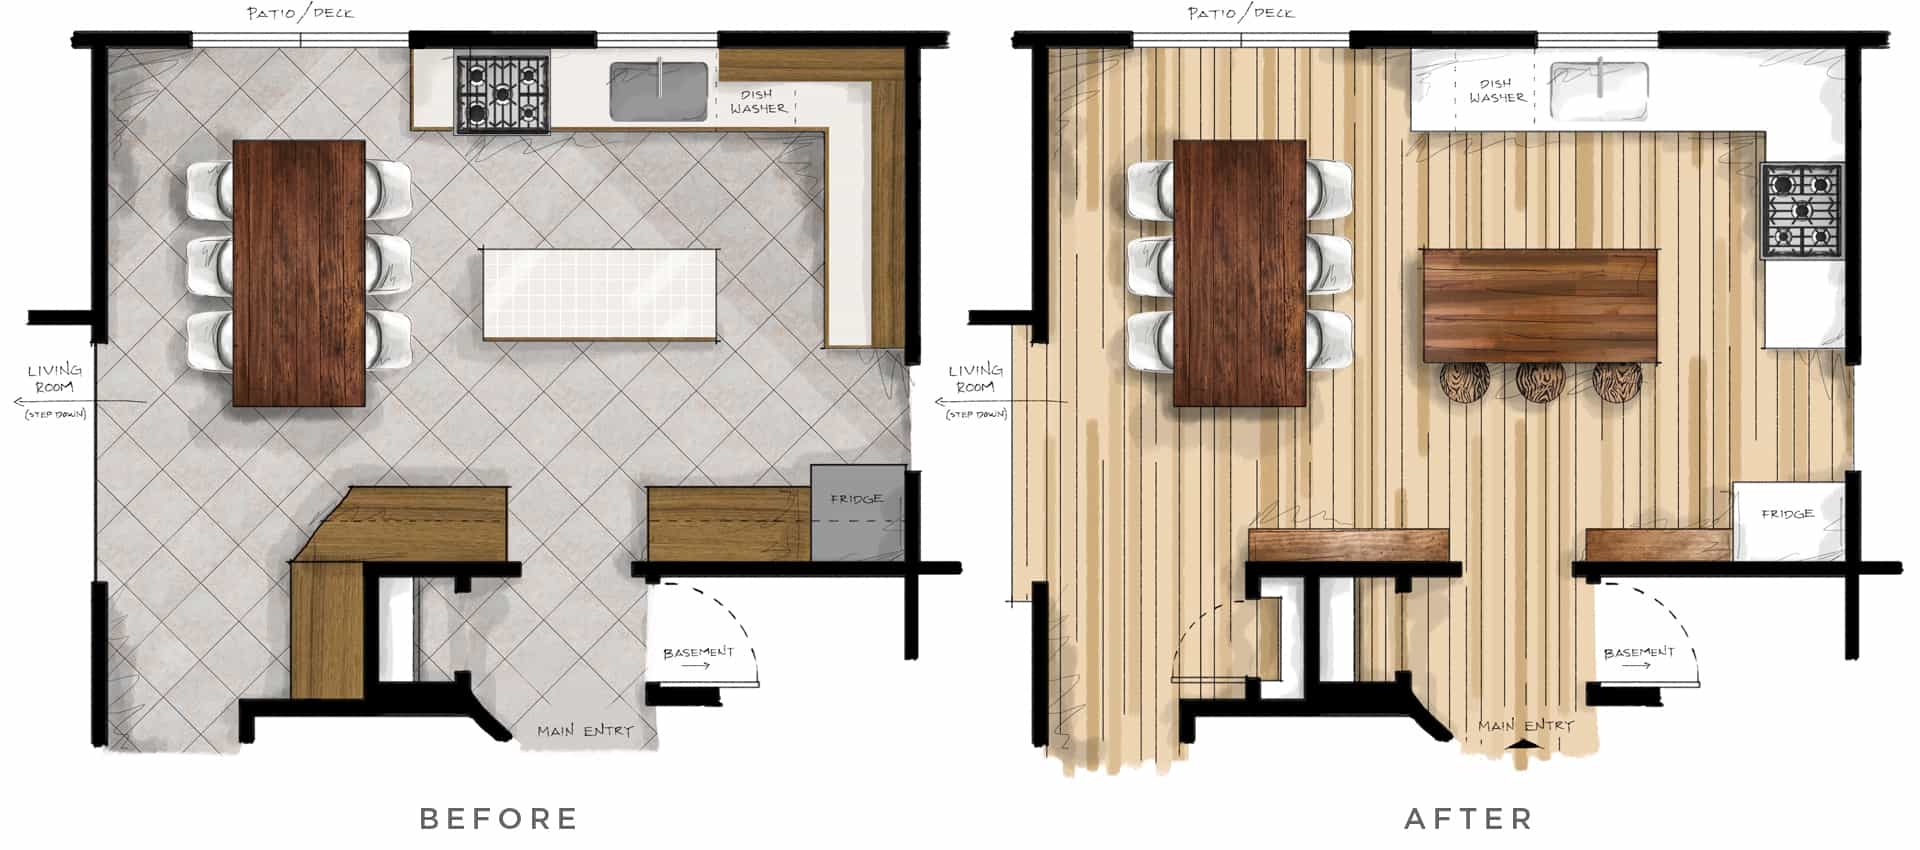 kitchen floor plan before and after